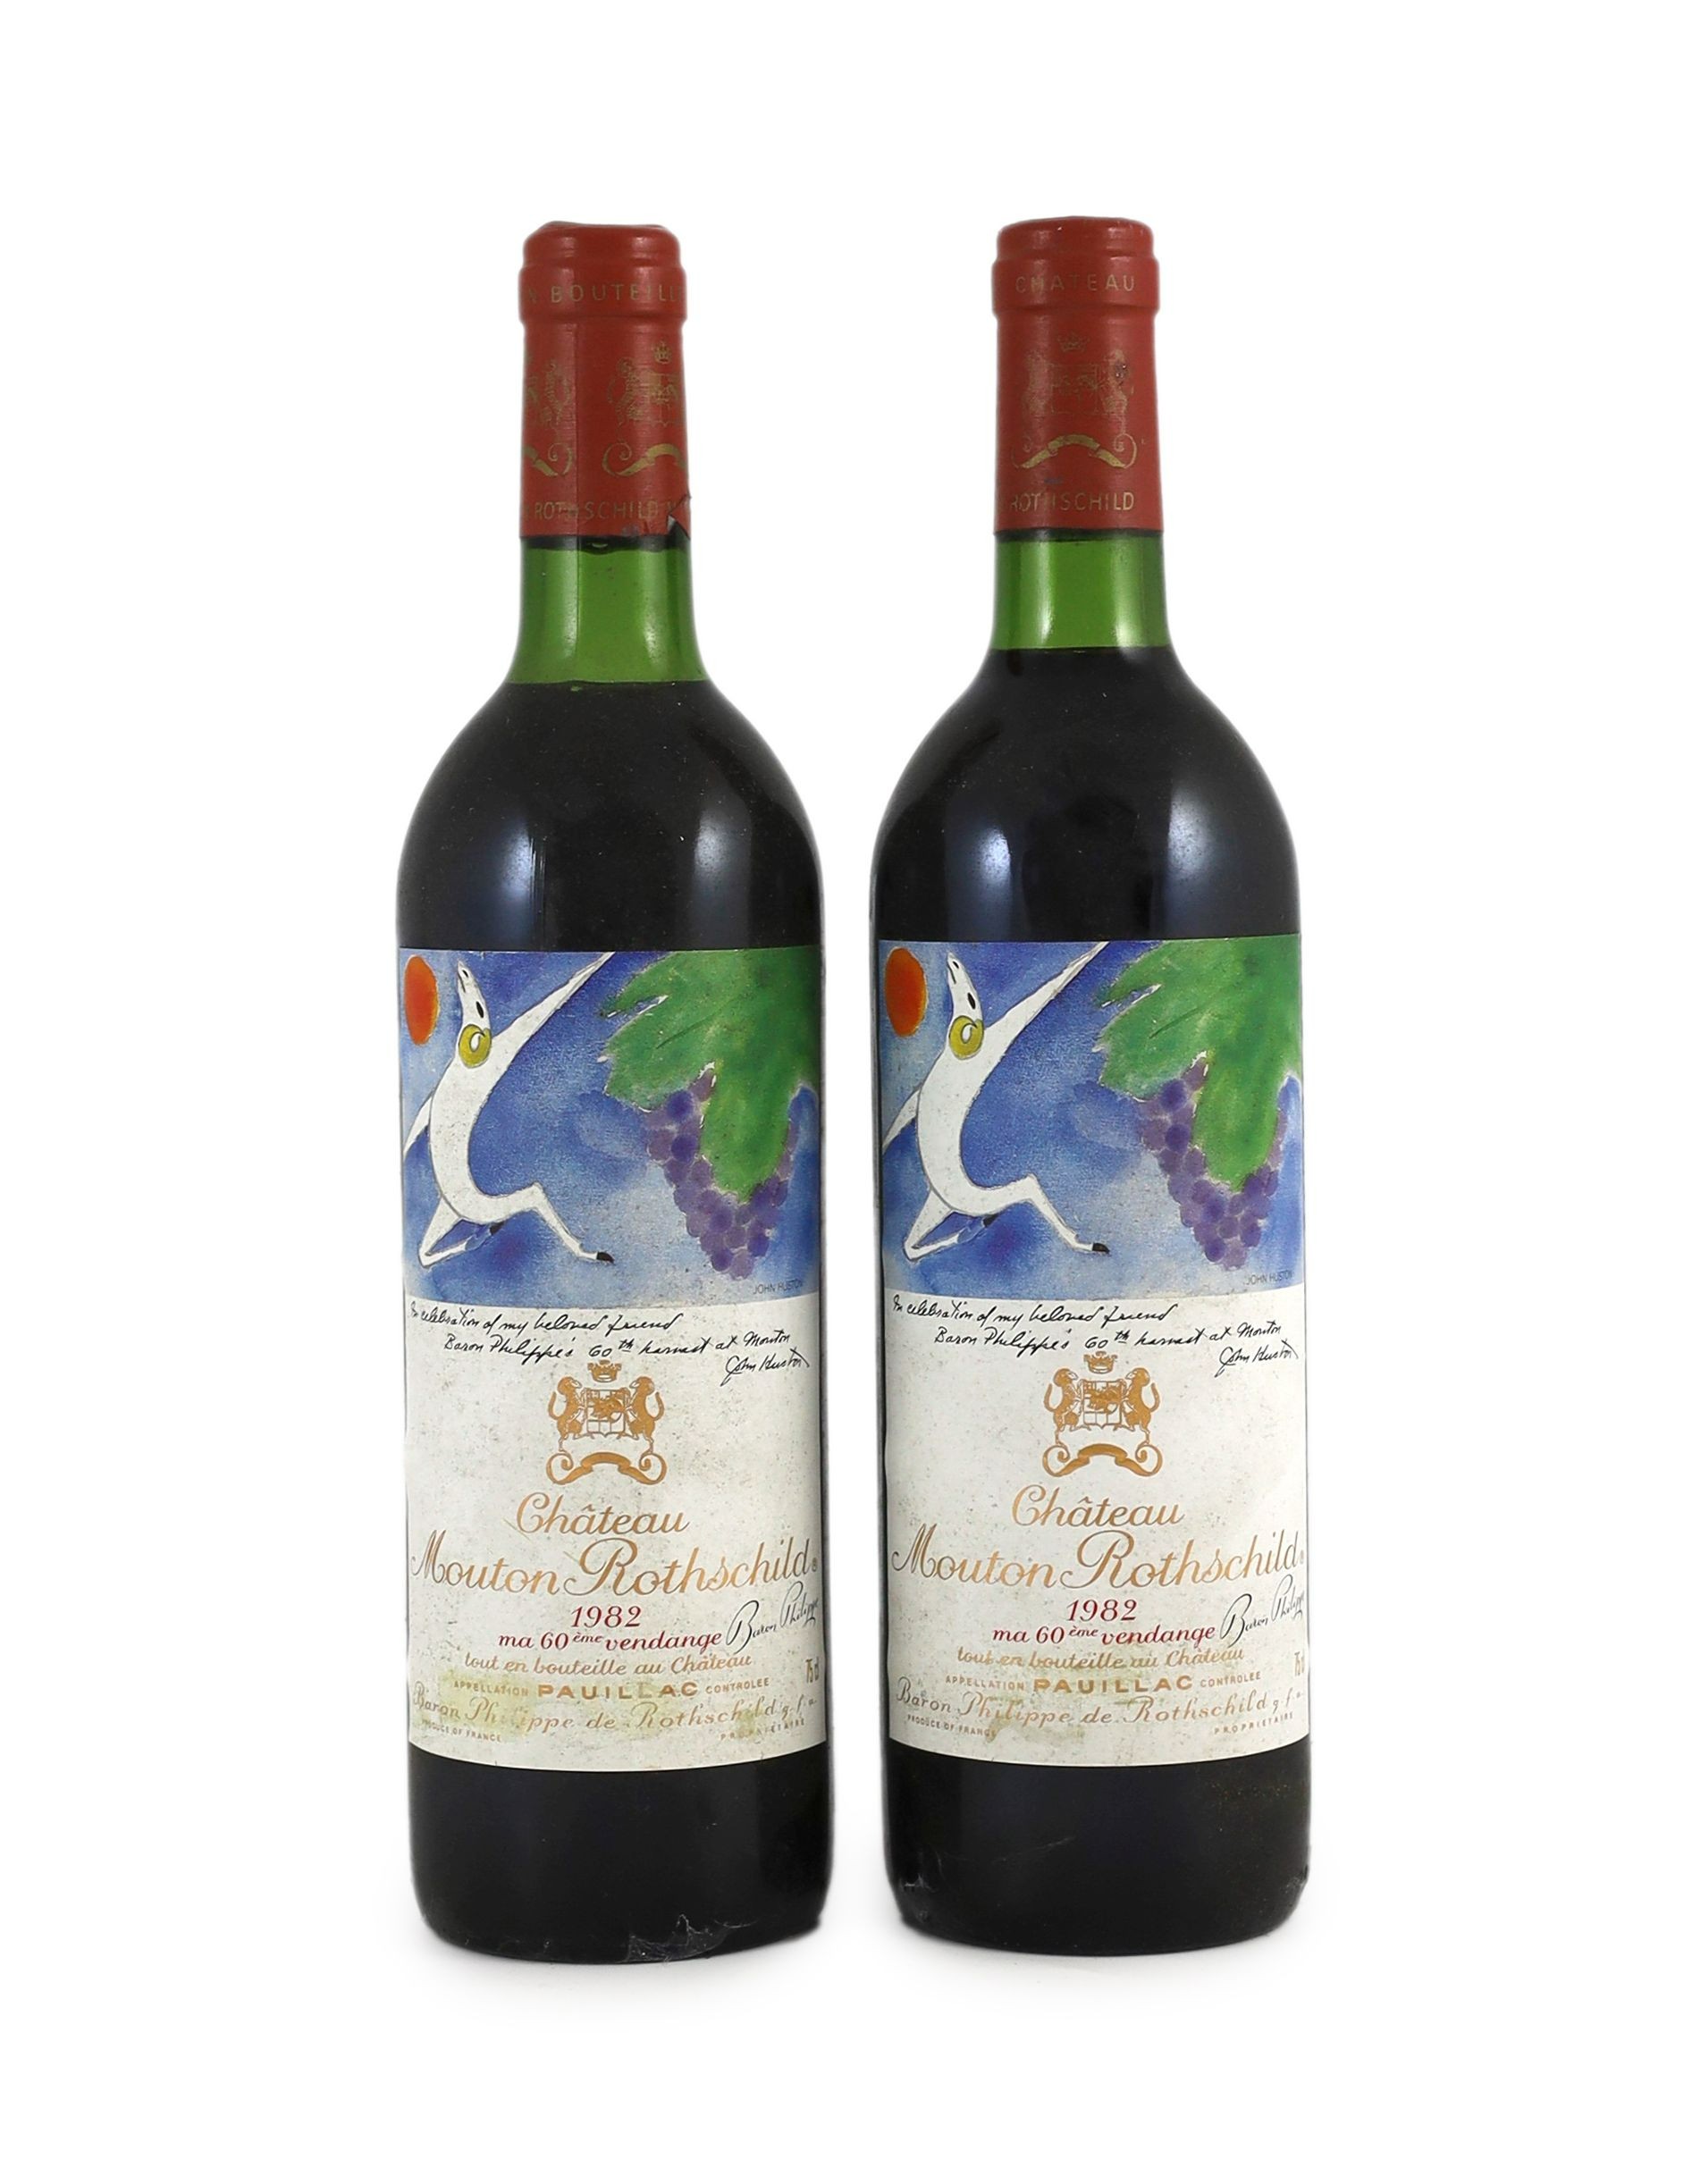 Two bottles of Chateau Mouton Rothschild 1982, height 30cm                                                                                                                                                                  